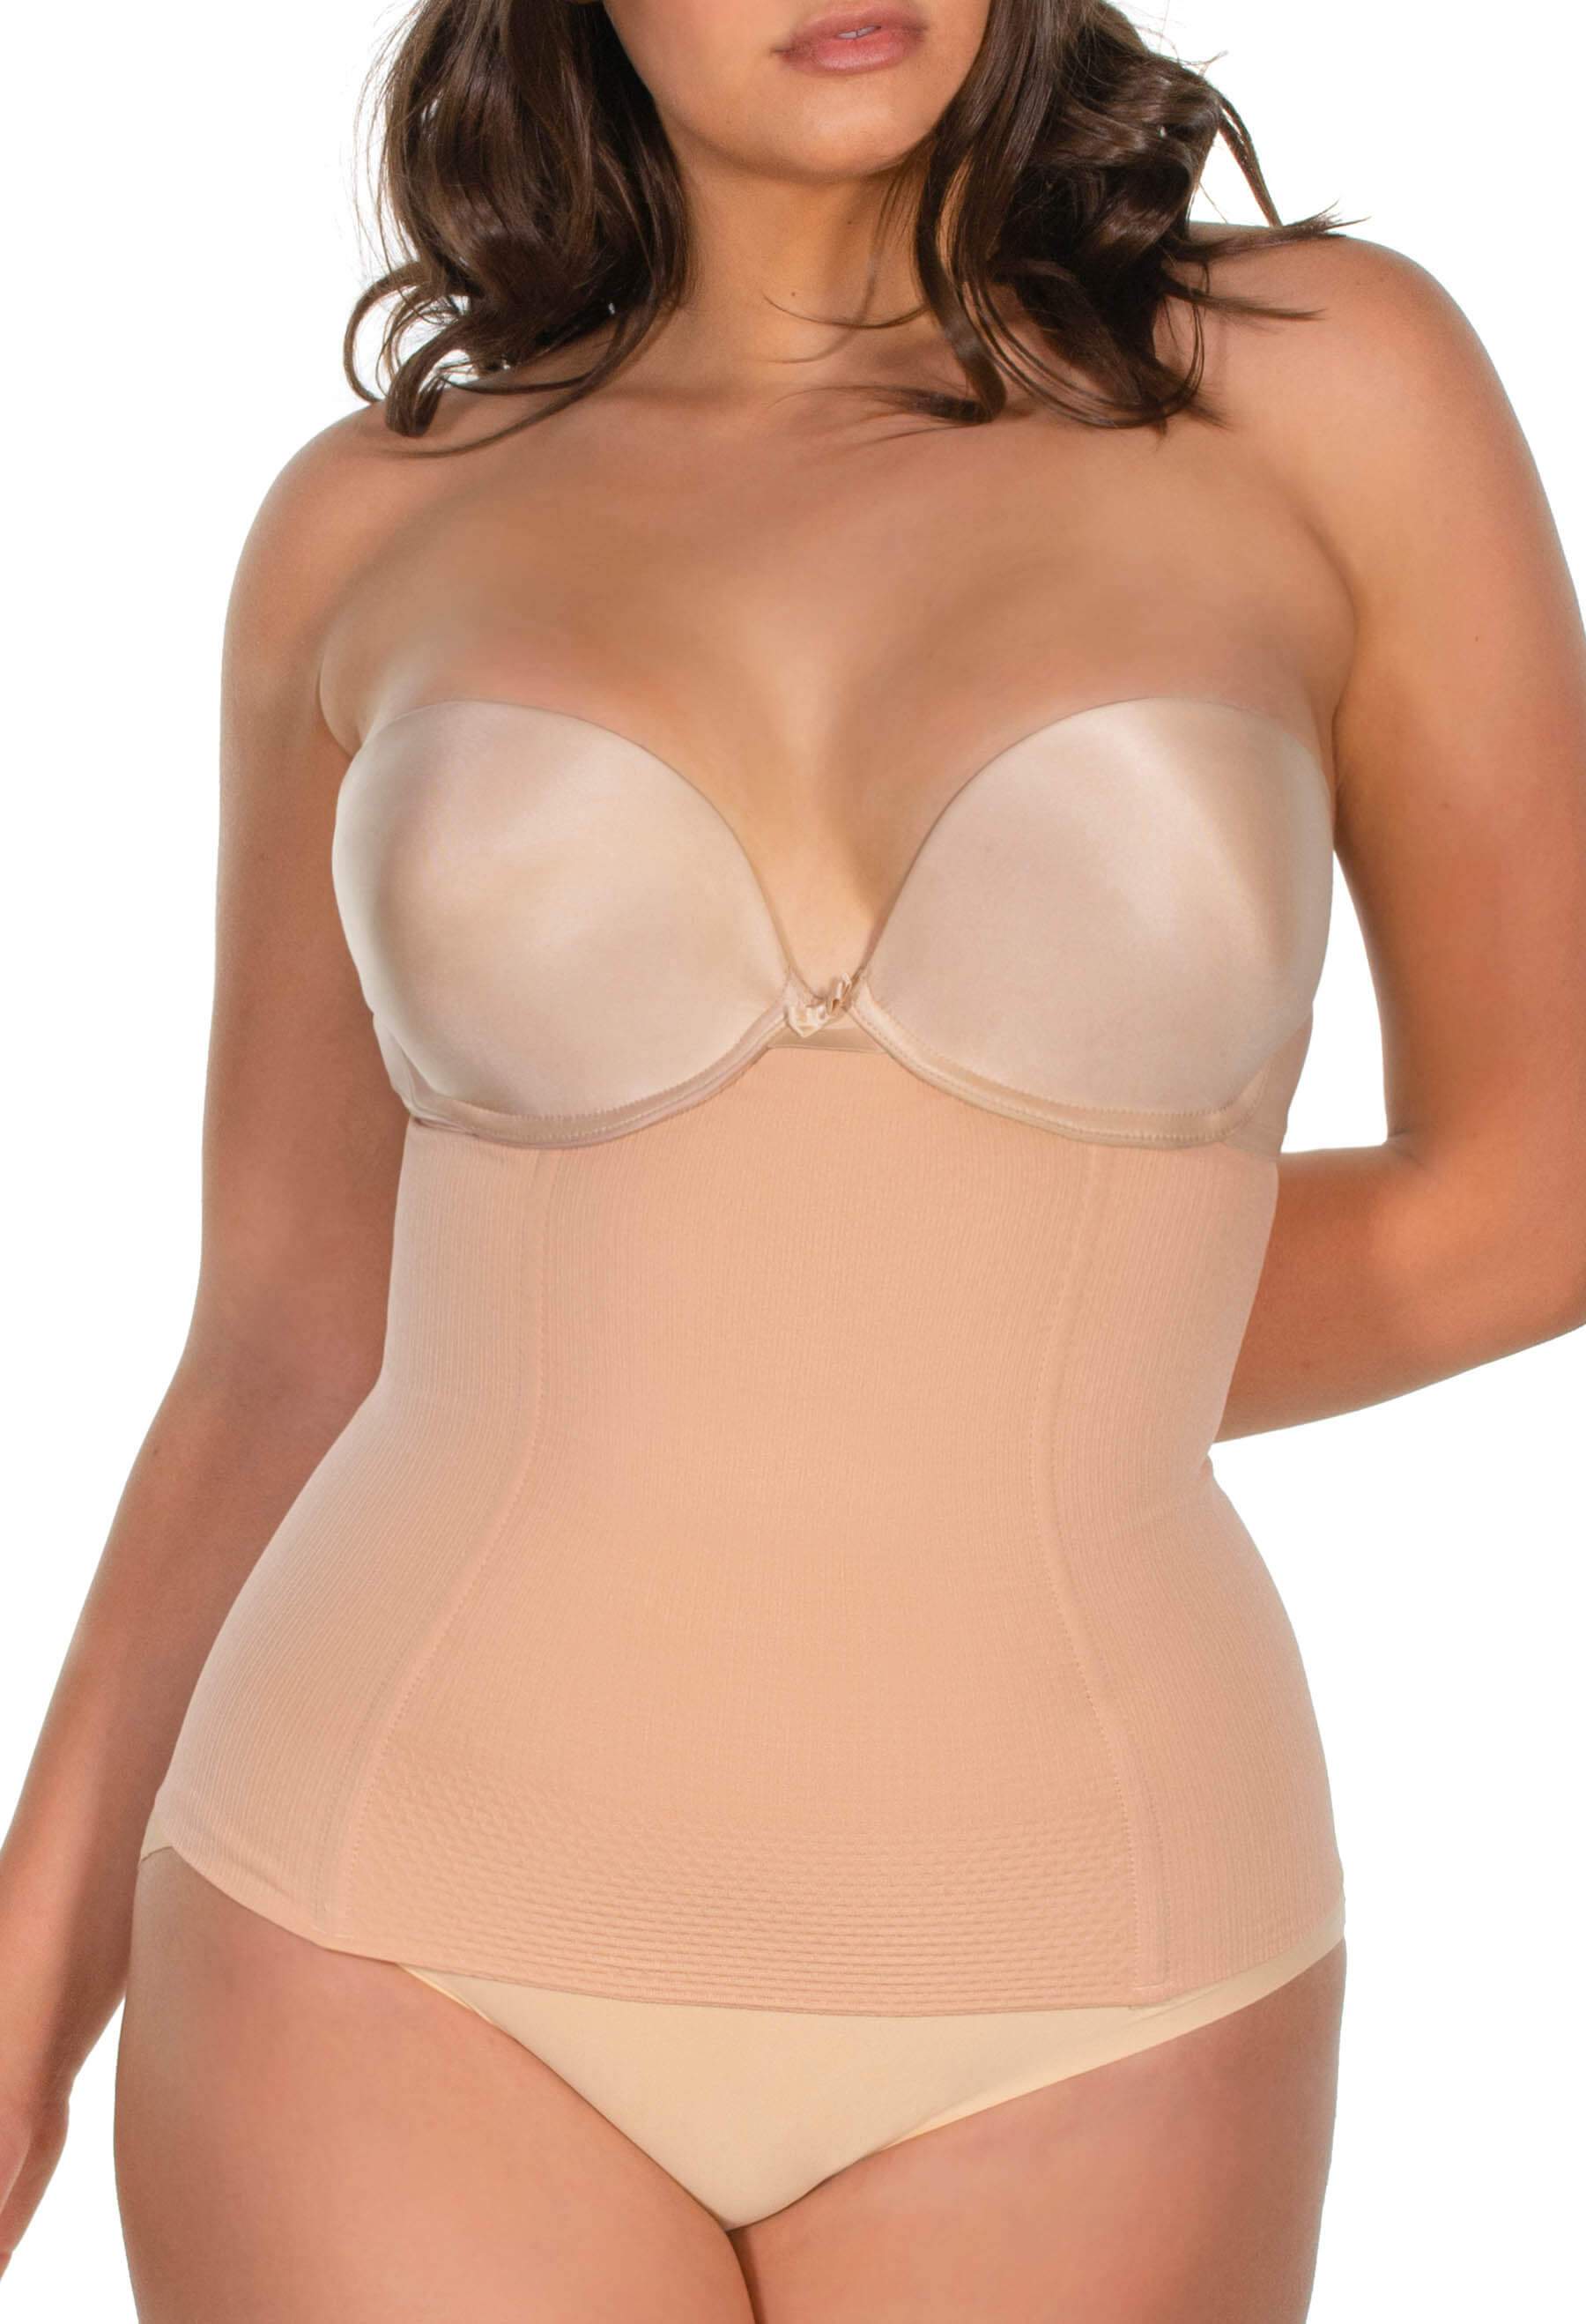 Extreme Tummy Control Shapewear Best Girdle to Hold in Stomach Shapewear  for Lower Belly Pooch –